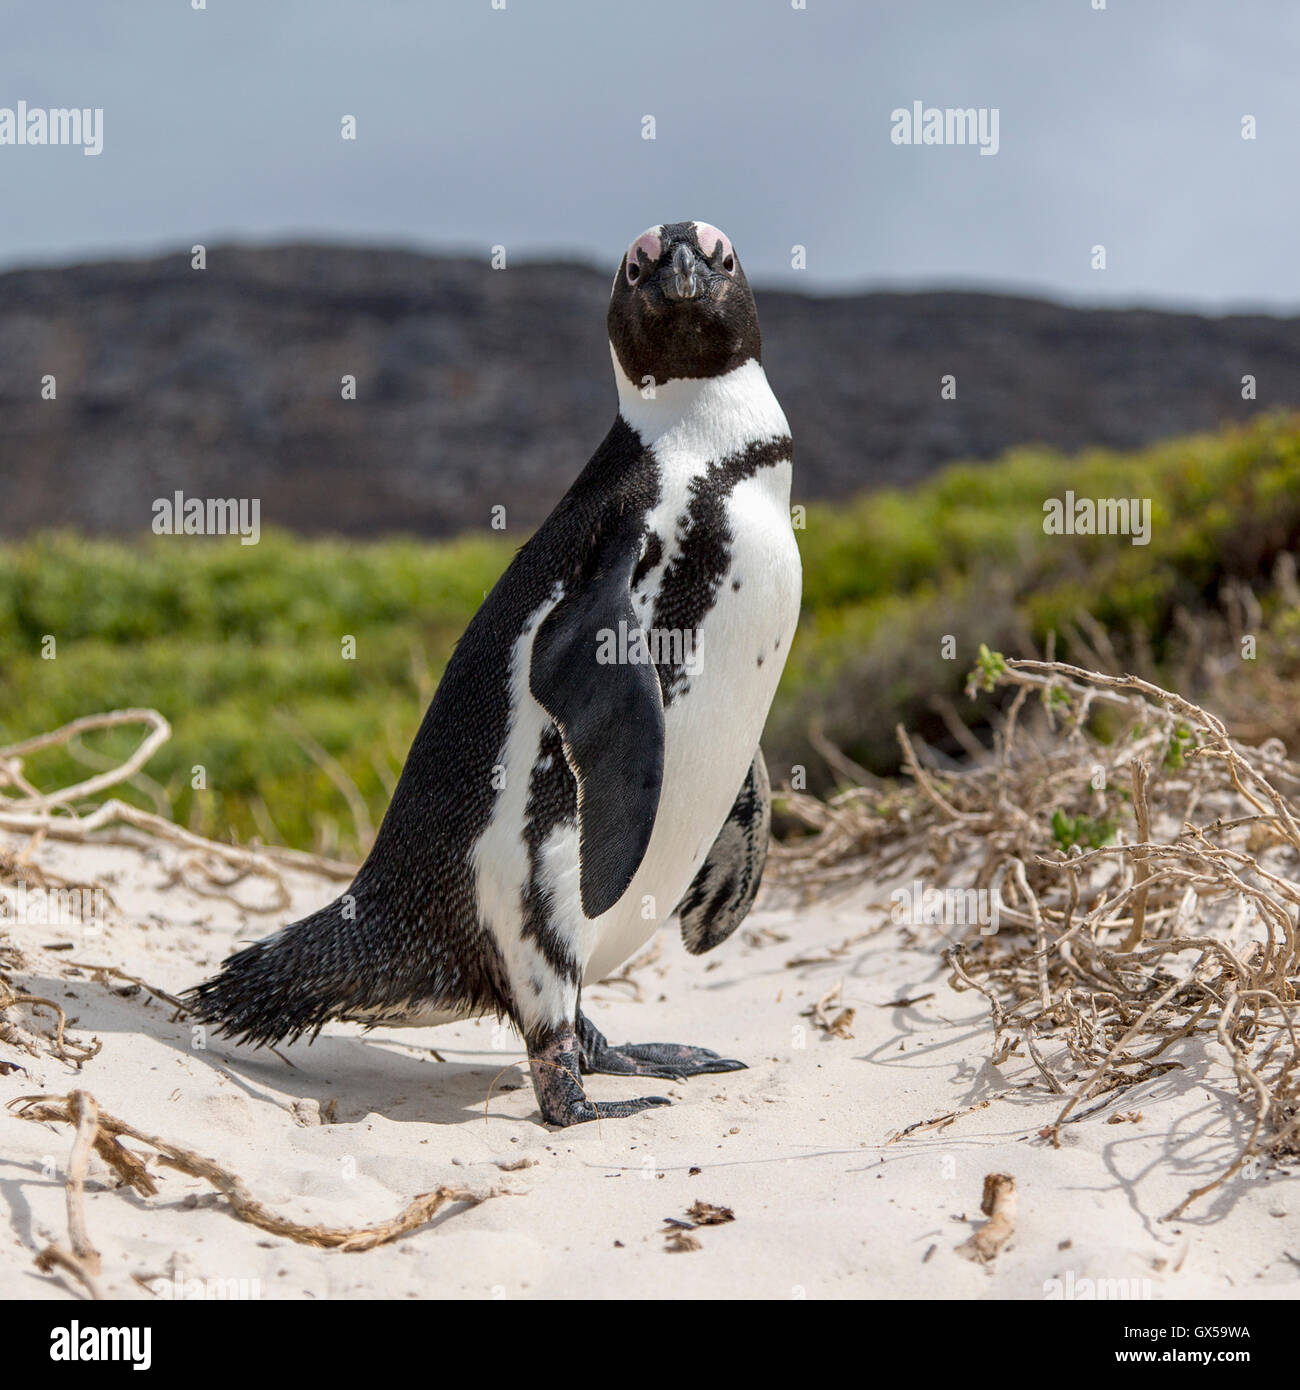 An African Penguin standing on the beach looking at the camera Stock Photo